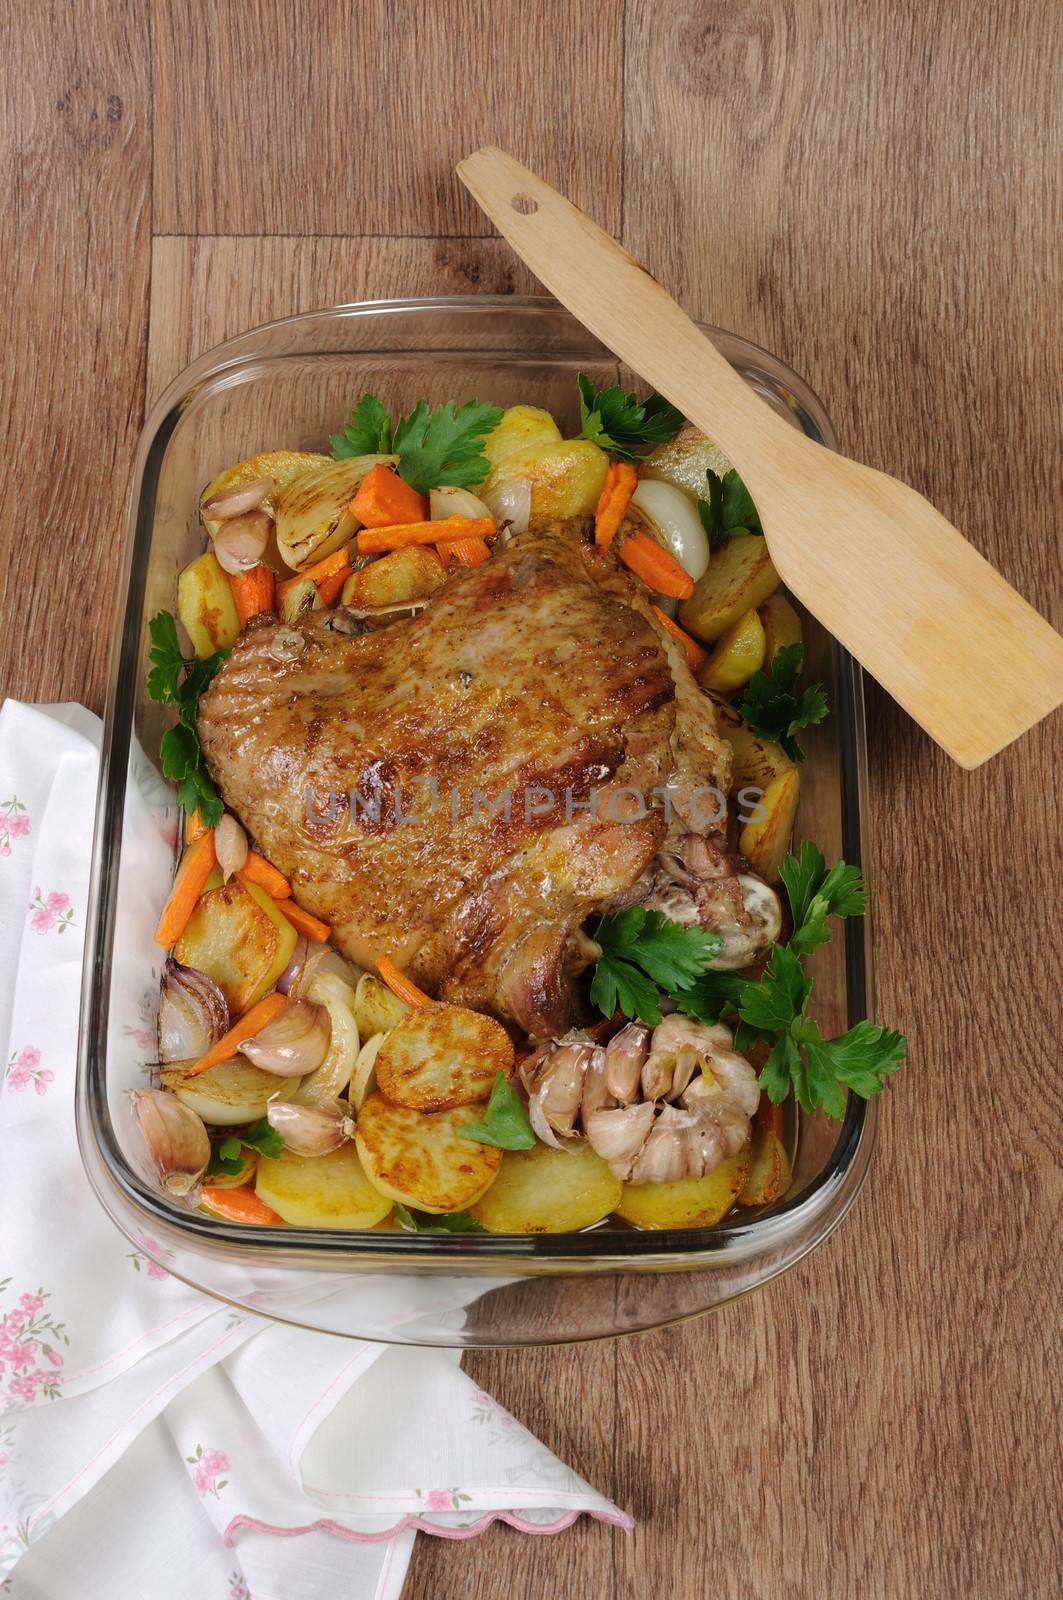 Turkey thigh baked with vegetables in a pan